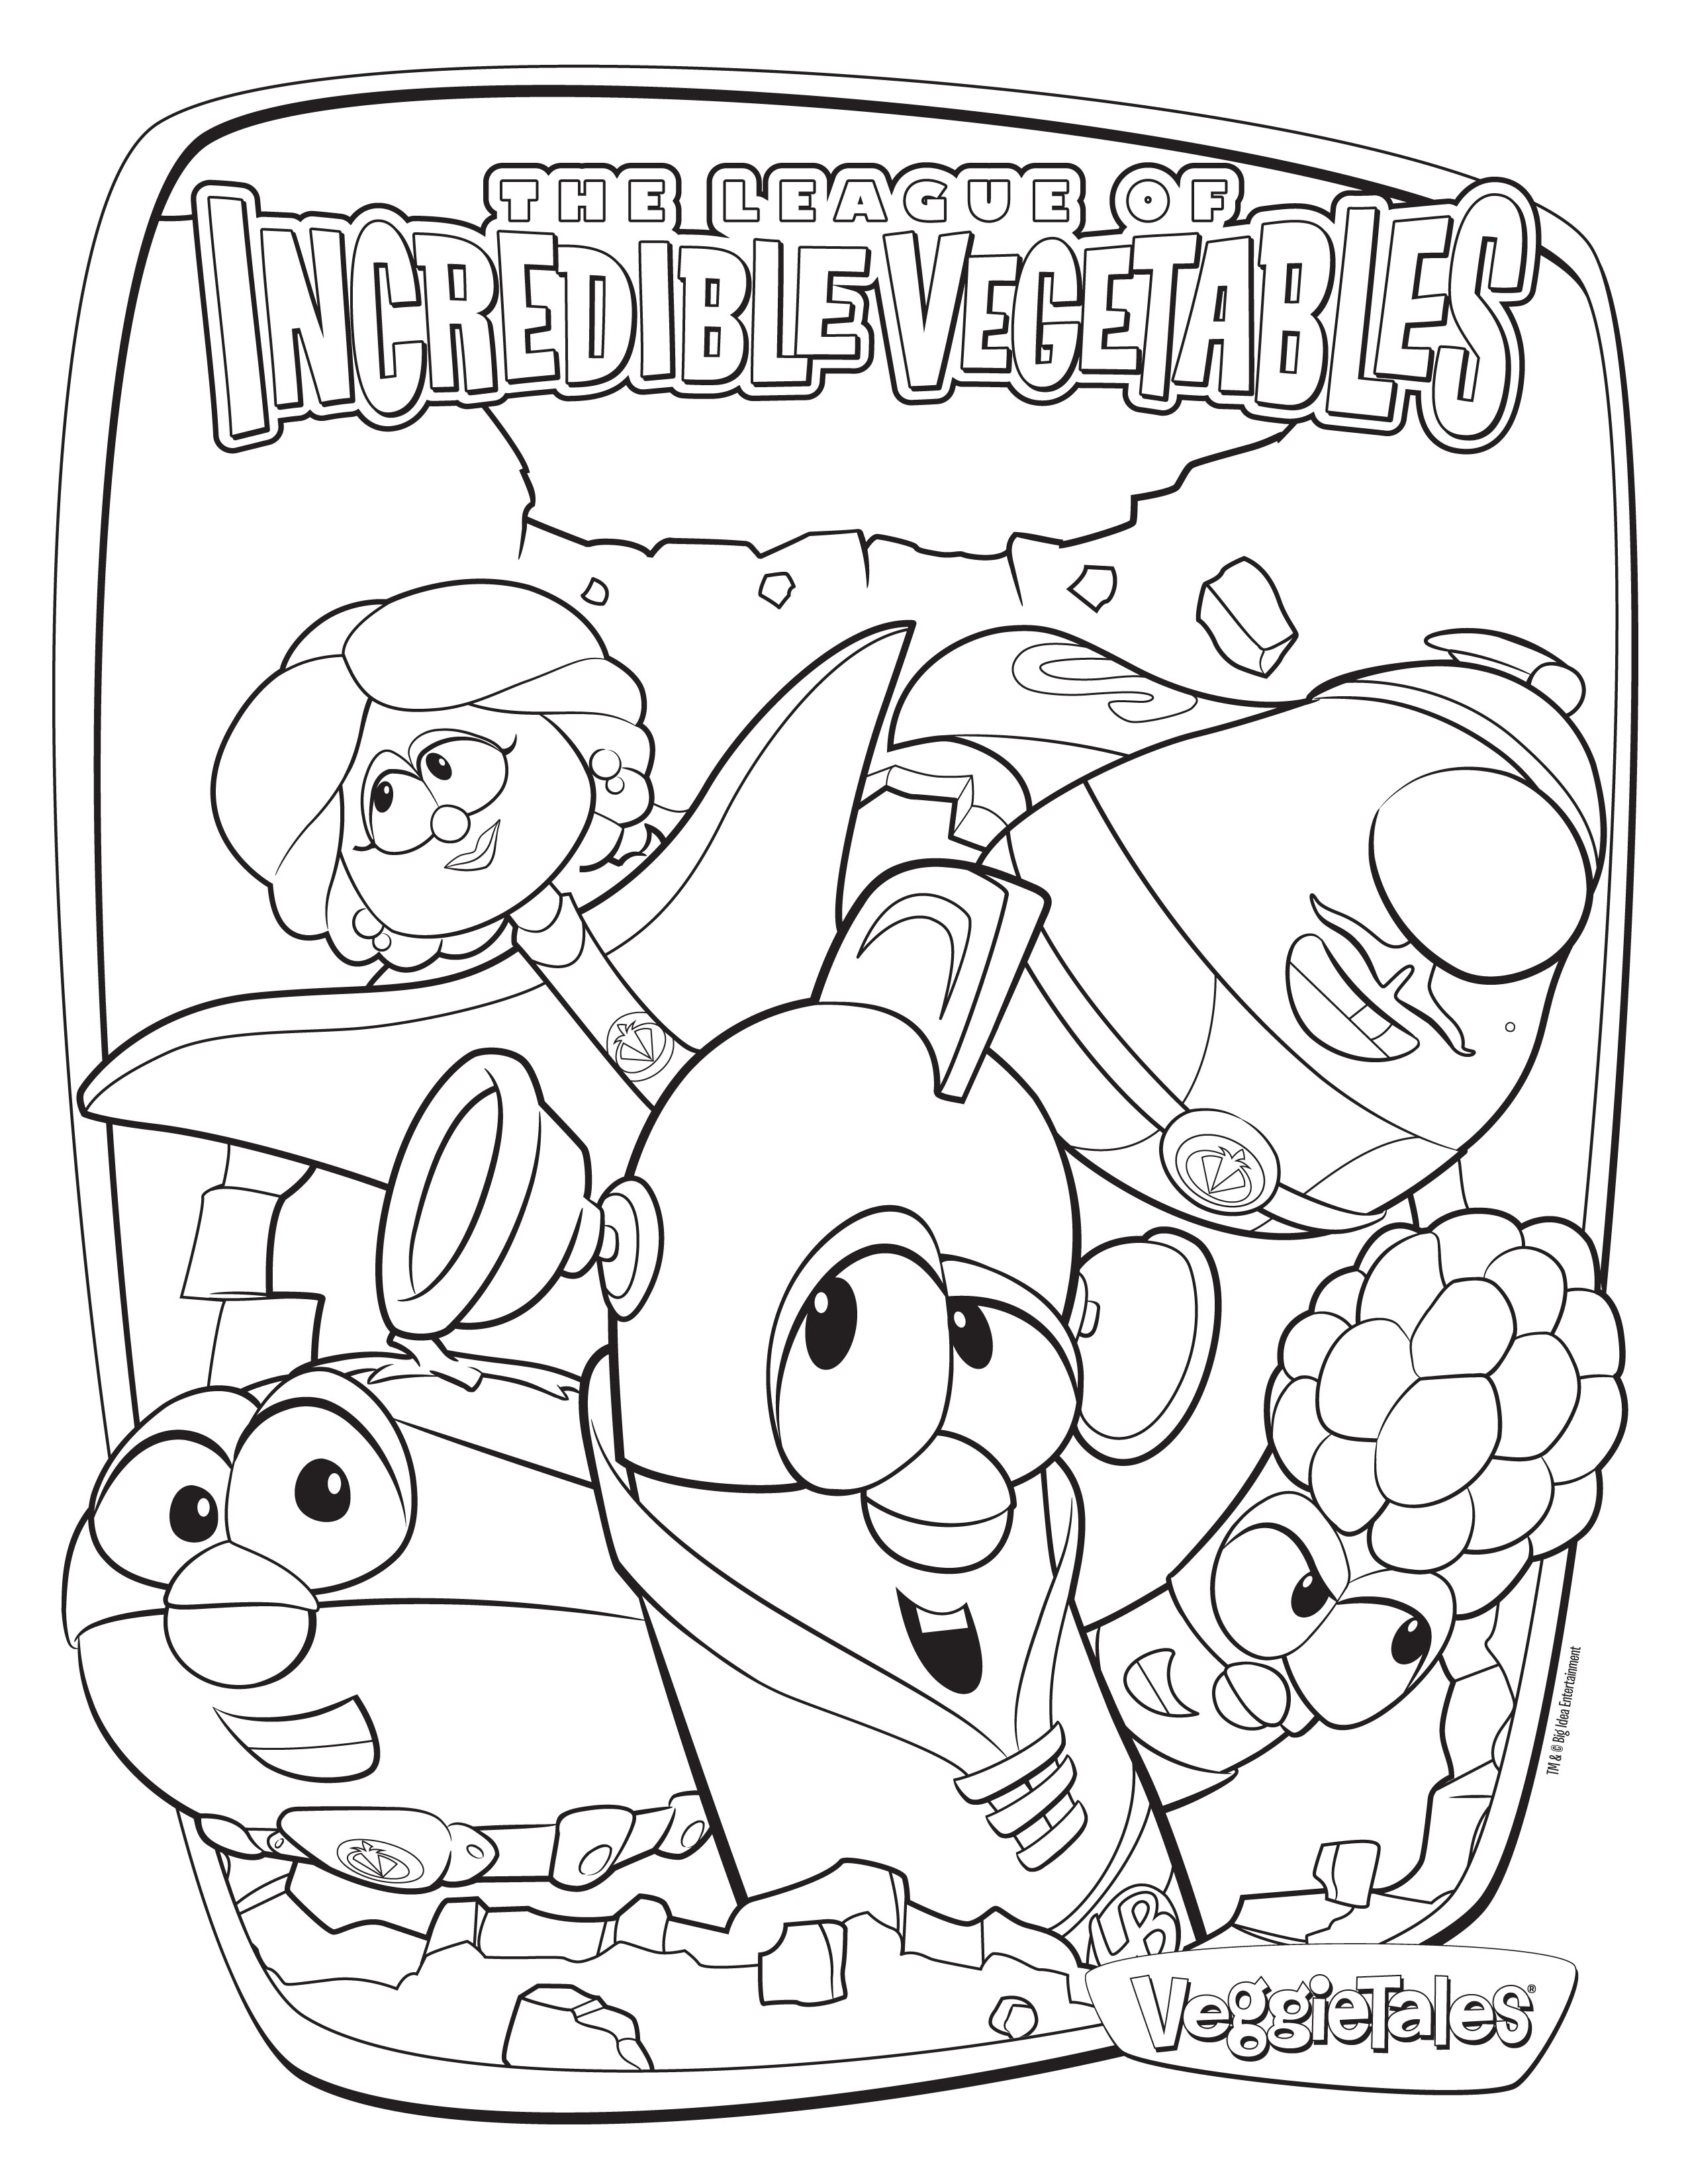 Vegetables Coloring Page The League Of Incredible Vegetables Coloring Pages